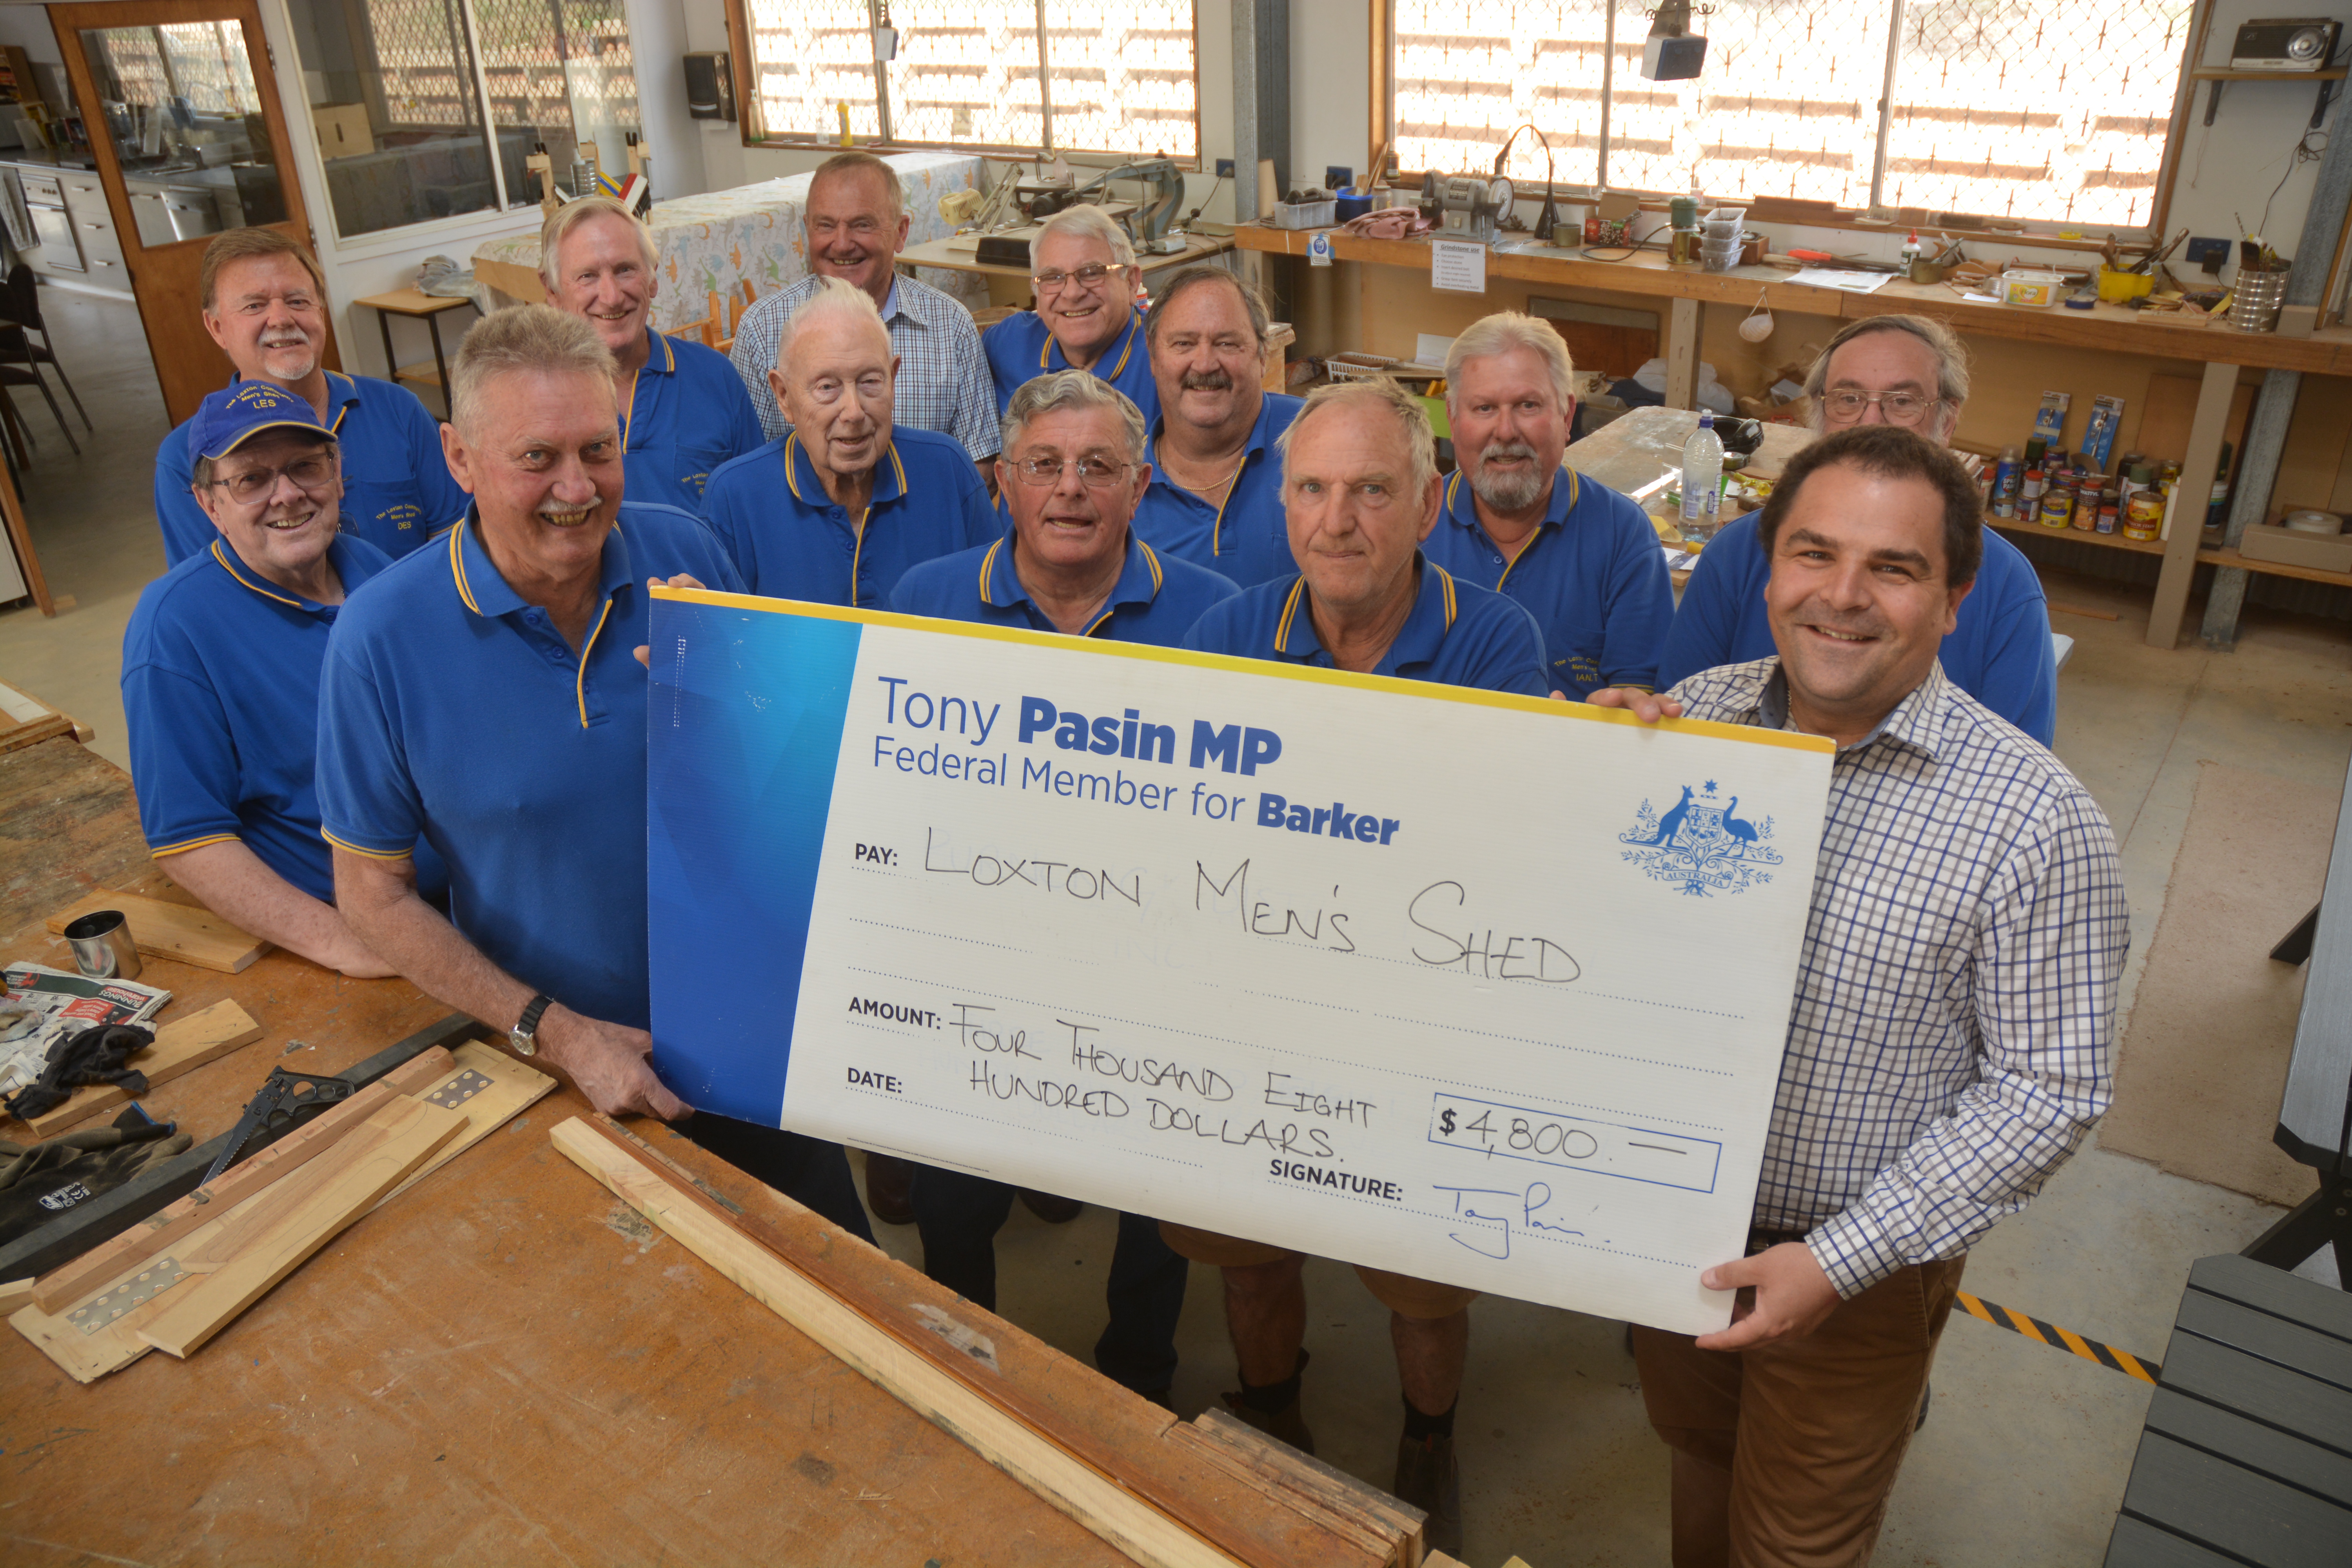 PASIN SECURES LOXTON MEN’S SHED FUNDING